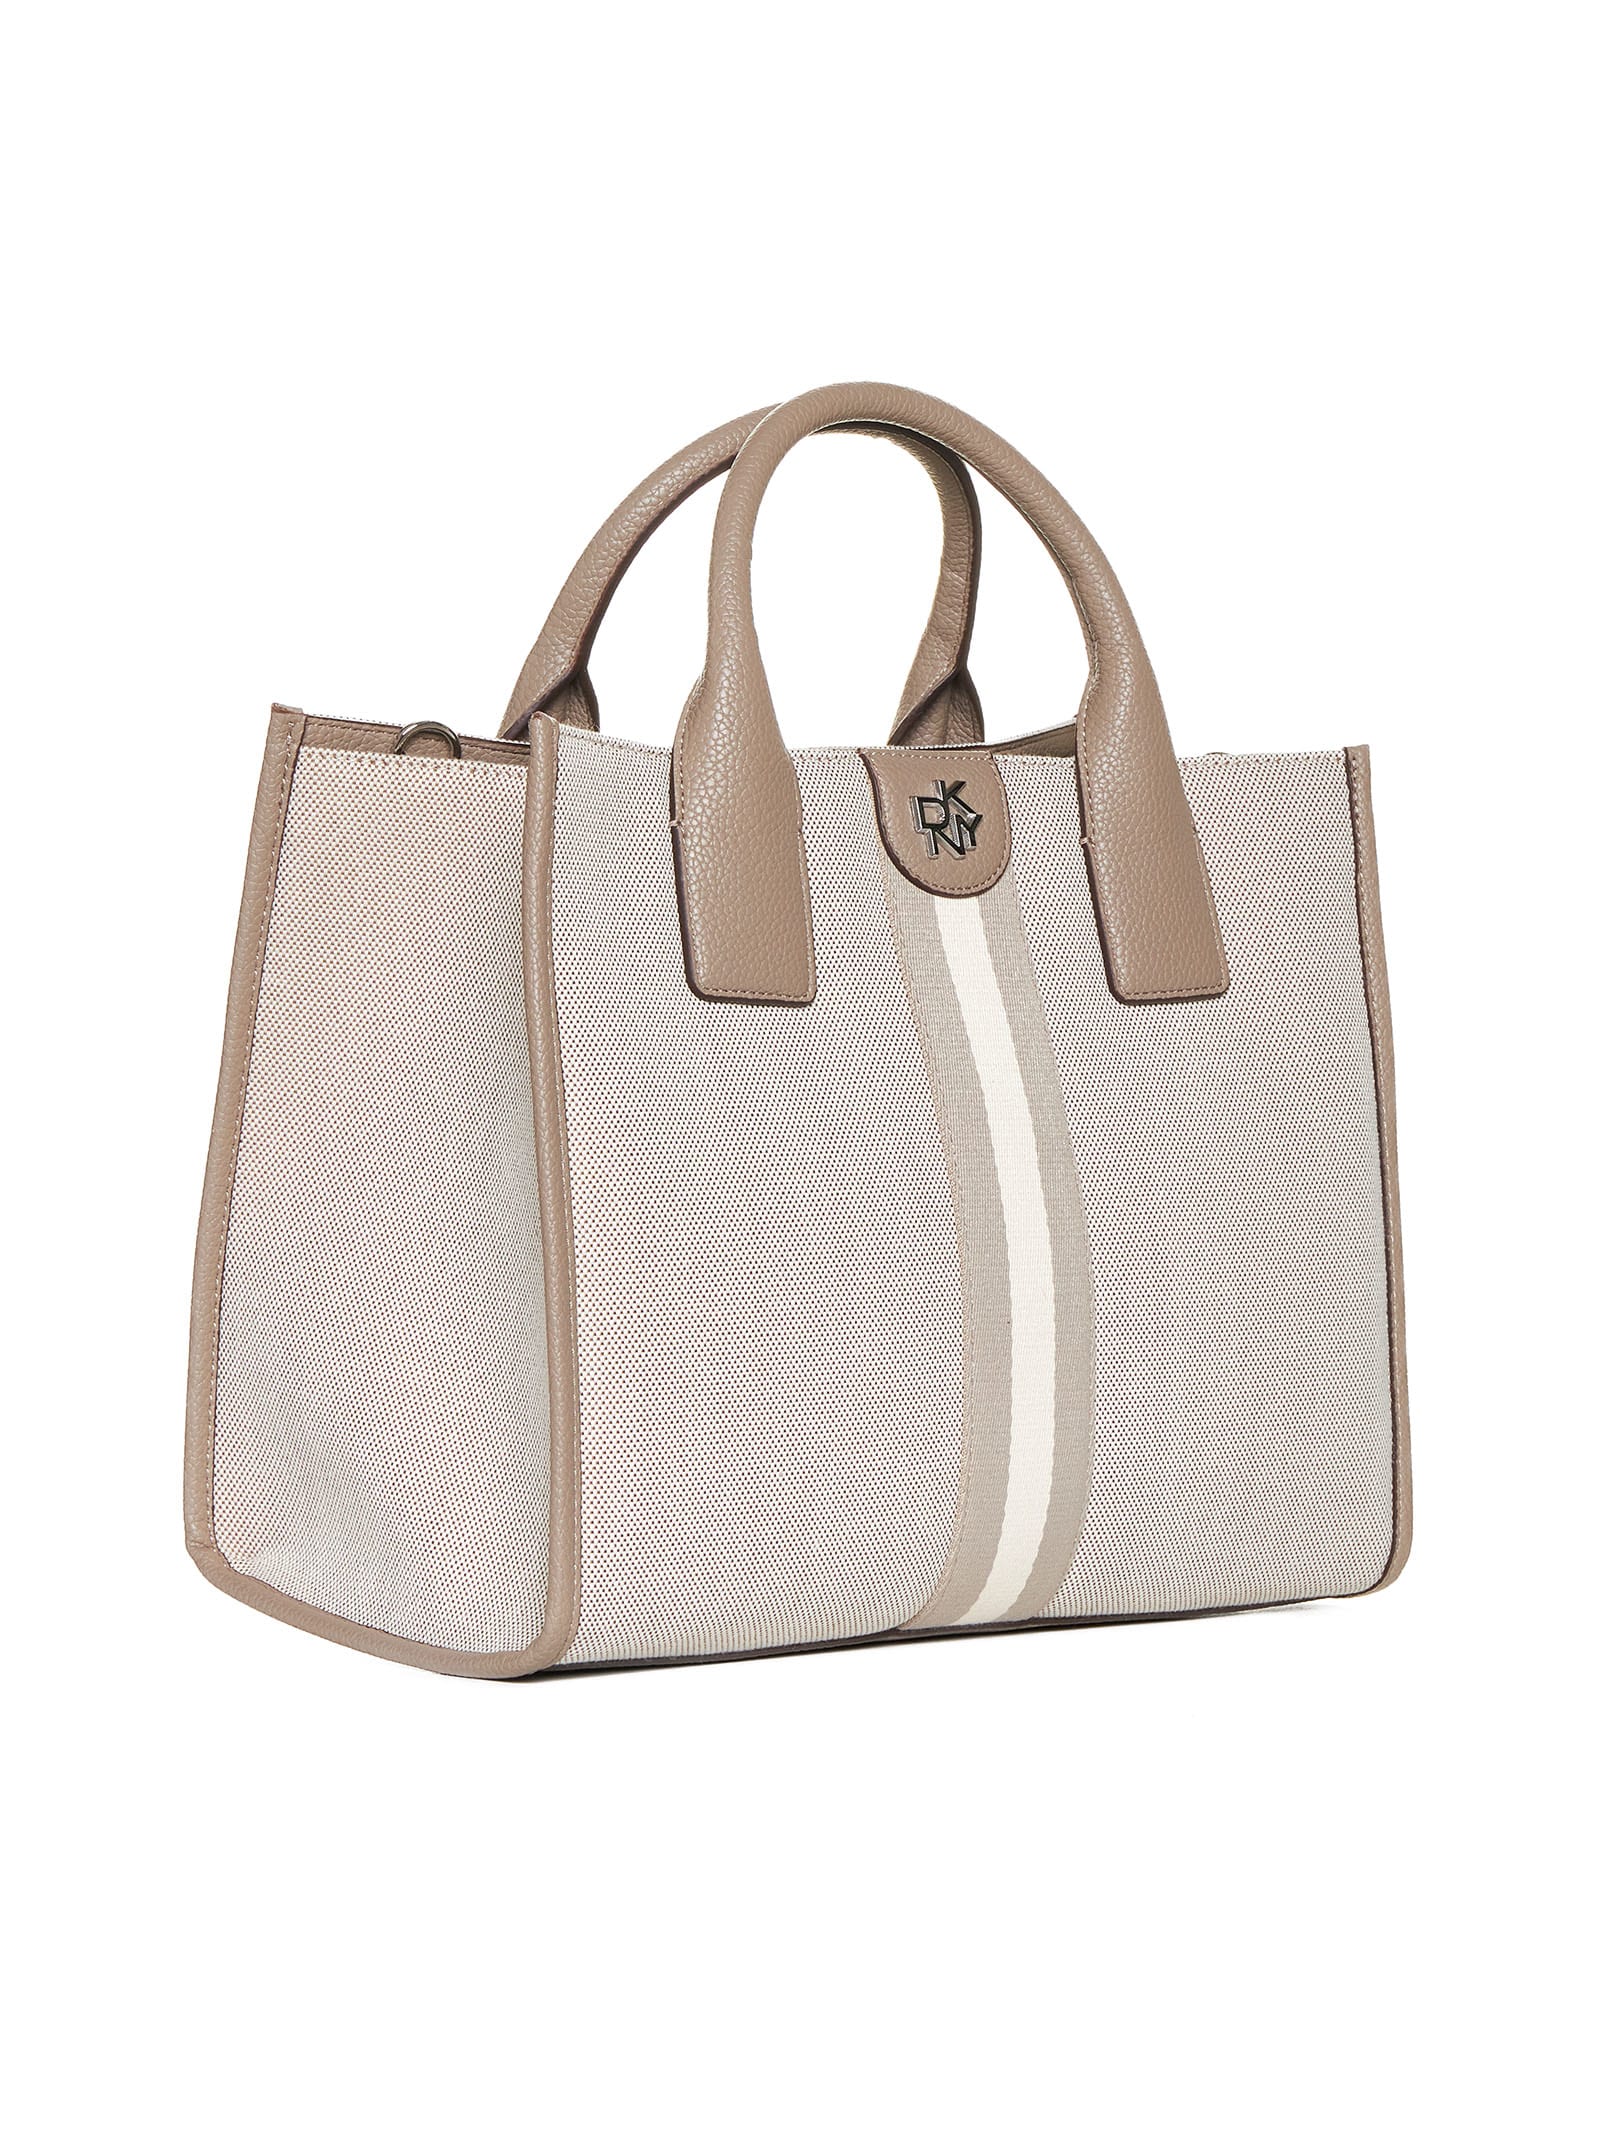 Shop Dkny Tote In Natural Multi